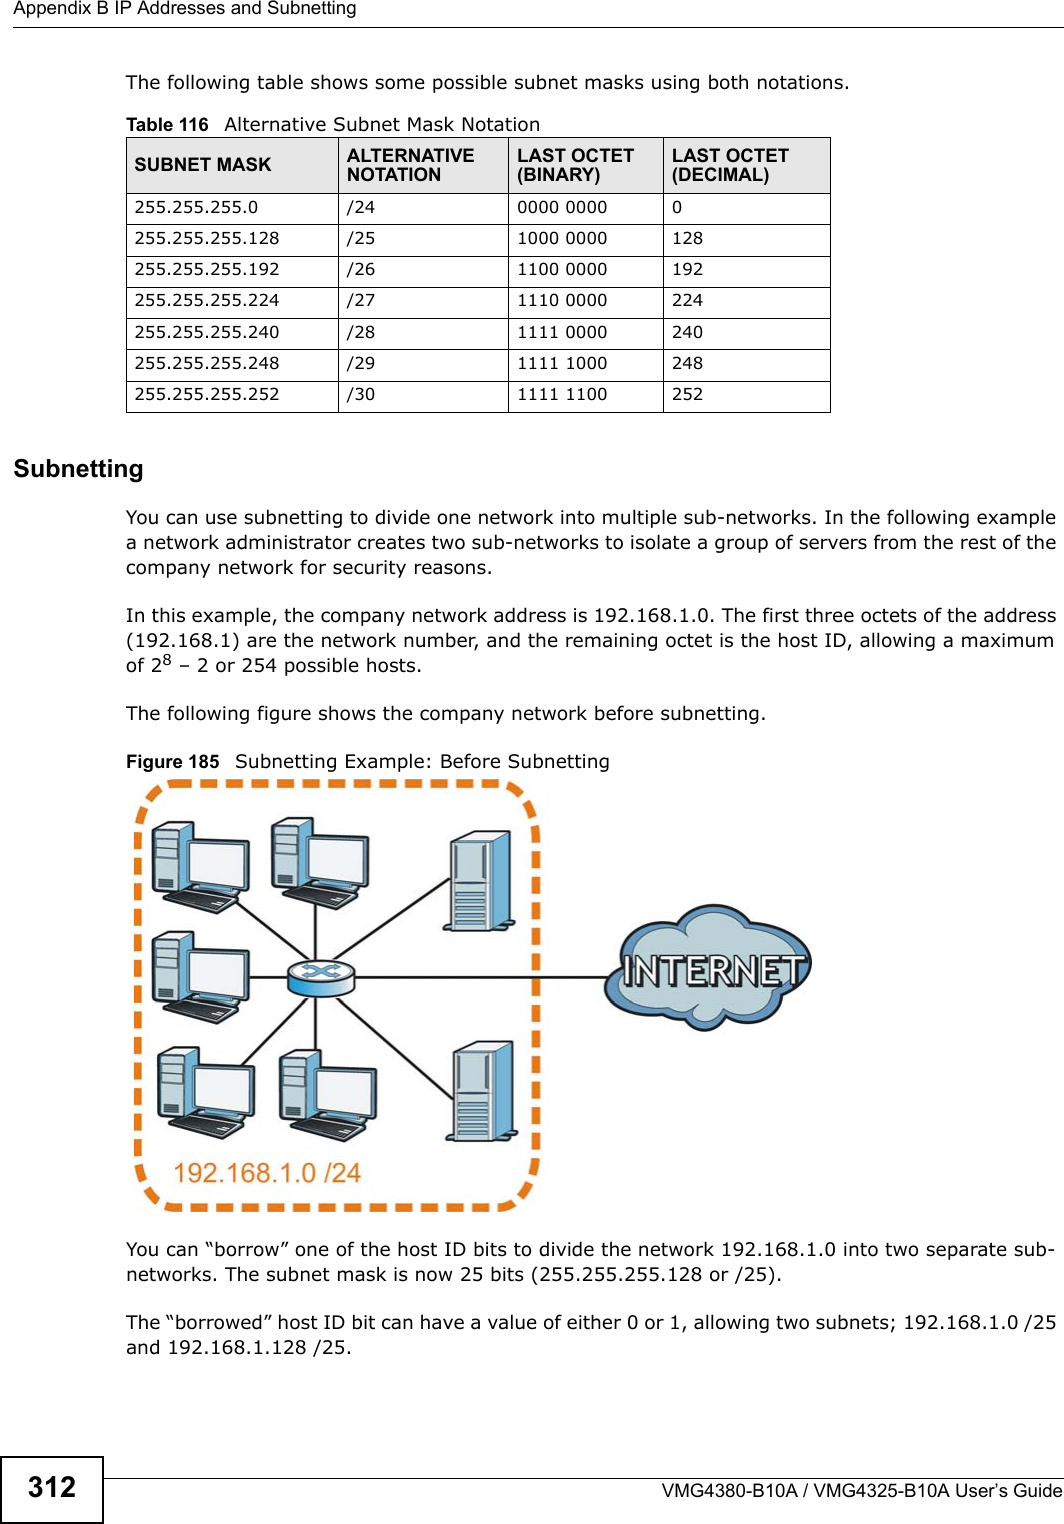 Appendix B IP Addresses and SubnettingVMG4380-B10A / VMG4325-B10A User’s Guide312The following table shows some possible subnet masks using both notations. SubnettingYou can use subnetting to divide one network into multiple sub-networks. In the following example a network administrator creates two sub-networks to isolate a group of servers from the rest of the company network for security reasons.In this example, the company network address is 192.168.1.0. The first three octets of the address (192.168.1) are the network number, and the remaining octet is the host ID, allowing a maximum of 28 – 2 or 254 possible hosts.The following figure shows the company network before subnetting.  Figure 185   Subnetting Example: Before SubnettingYou can “borrow” one of the host ID bits to divide the network 192.168.1.0 into two separate sub-networks. The subnet mask is now 25 bits (255.255.255.128 or /25).The “borrowed” host ID bit can have a value of either 0 or 1, allowing two subnets; 192.168.1.0 /25 and 192.168.1.128 /25.Table 116   Alternative Subnet Mask NotationSUBNET MASK ALTERNATIVE NOTATIONLAST OCTET (BINARY)LAST OCTET (DECIMAL)255.255.255.0 /24 0000 0000 0255.255.255.128 /25 1000 0000 128255.255.255.192 /26 1100 0000 192255.255.255.224 /27 1110 0000 224255.255.255.240 /28 1111 0000 240255.255.255.248 /29 1111 1000 248255.255.255.252 /30 1111 1100 252